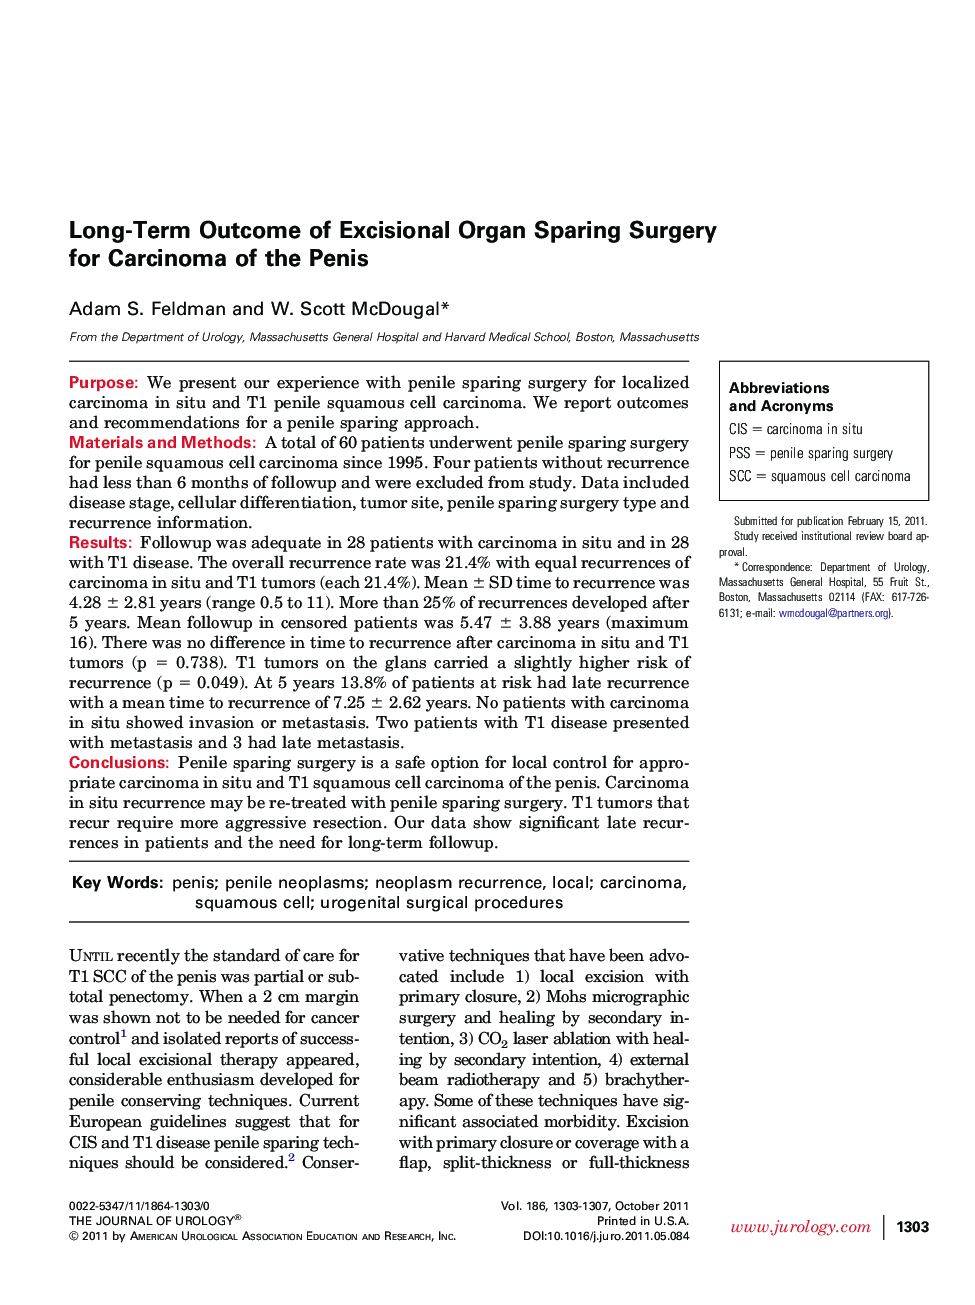 Long-Term Outcome of Excisional Organ Sparing Surgery for Carcinoma of the Penis 